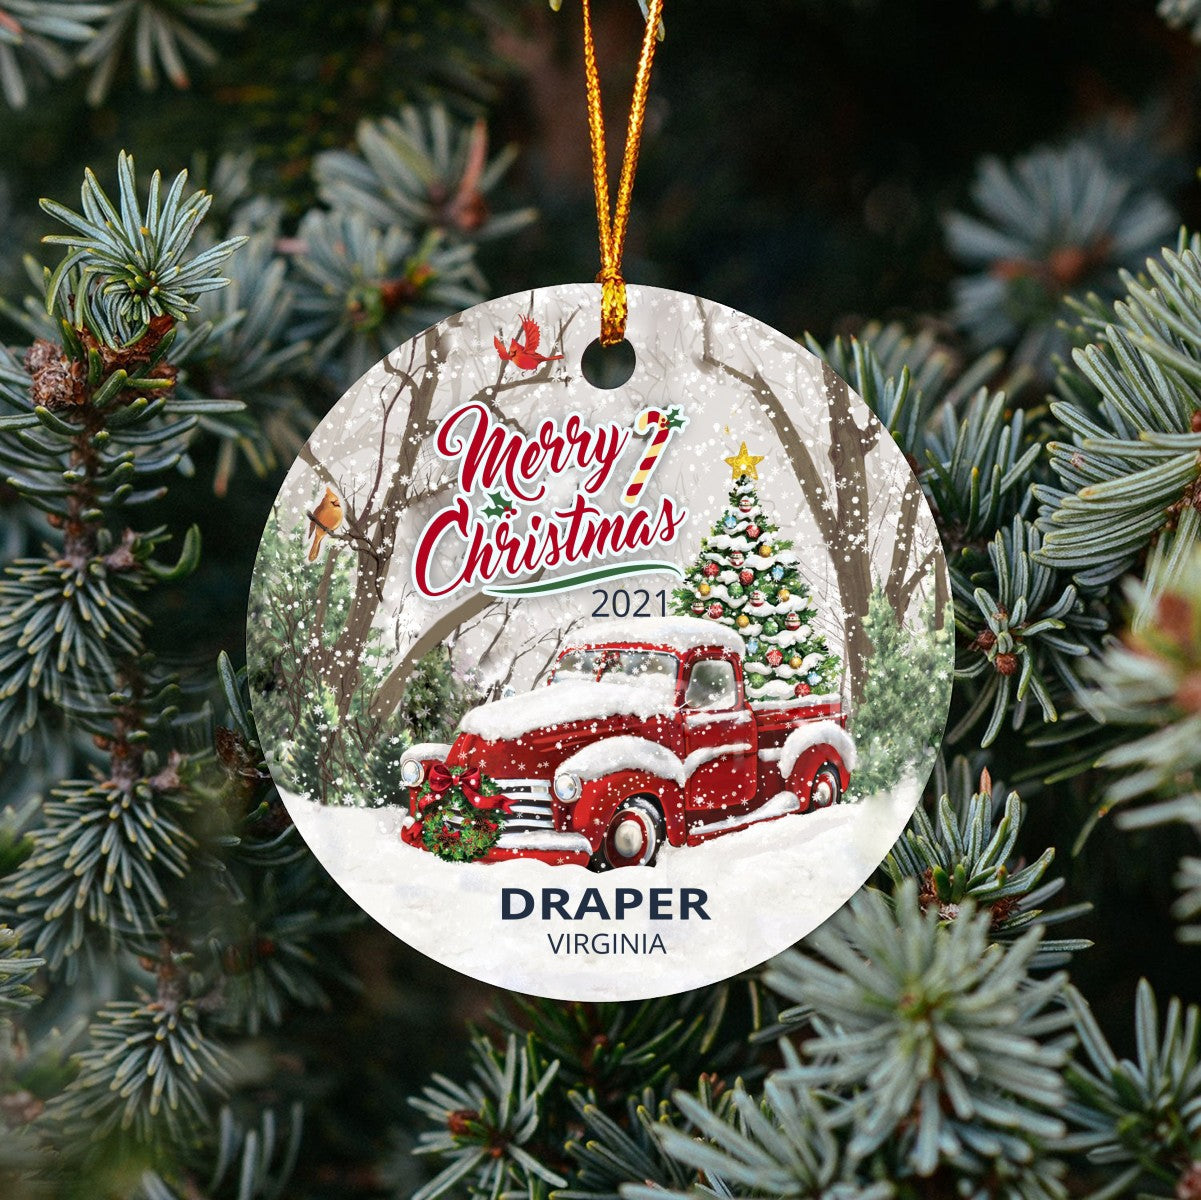 Christmas Tree Ornaments Draper - Ornament With Name City, State Draper Virginia VA Ornament - Red Truck Xmas Ornaments 3'' Plastic Gift For Family, Friend And Housewarming